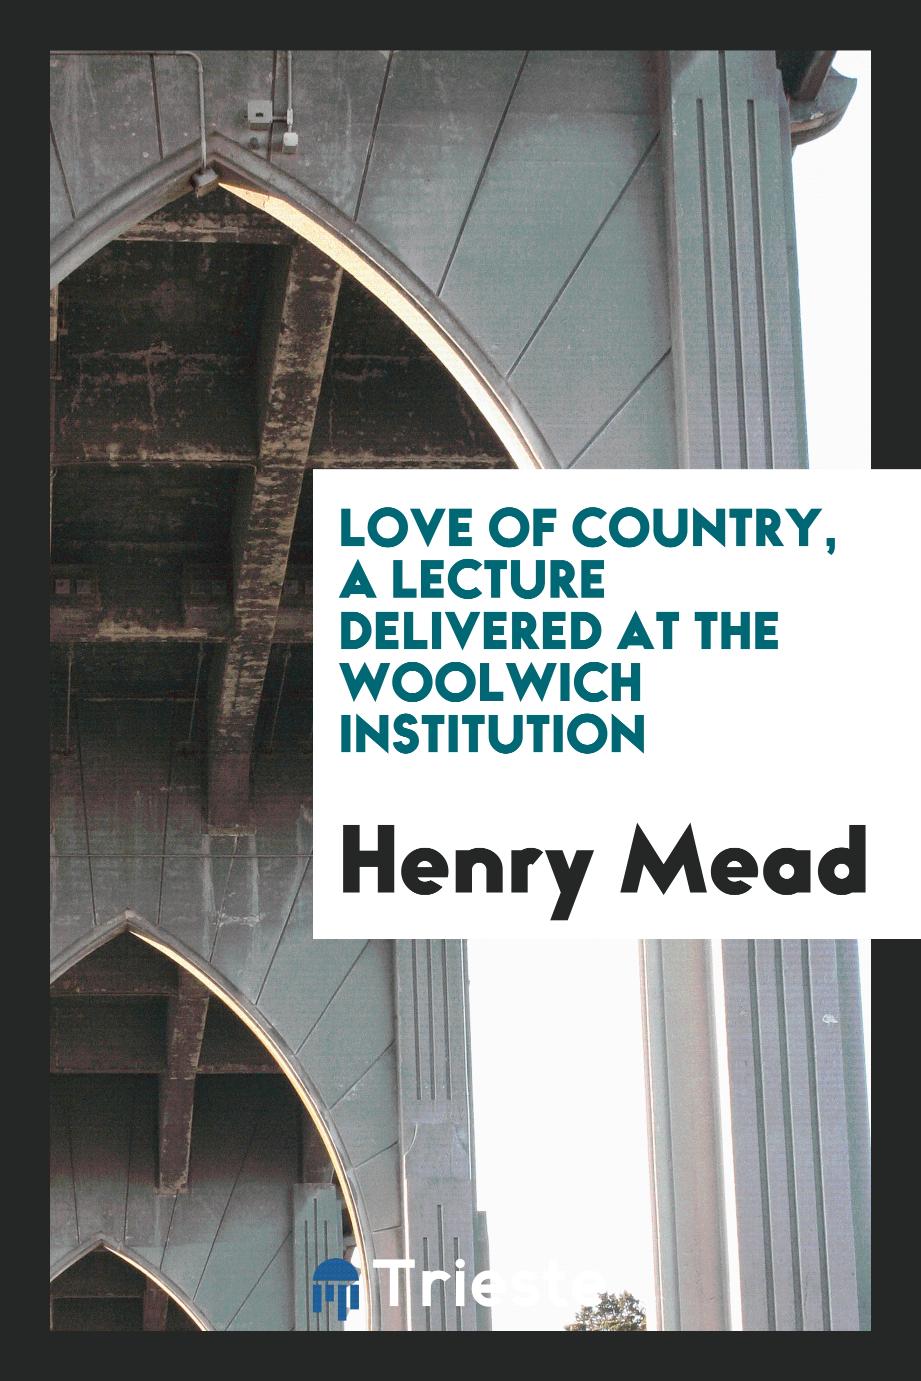 Love of country, a lecture delivered at the woolwich institution